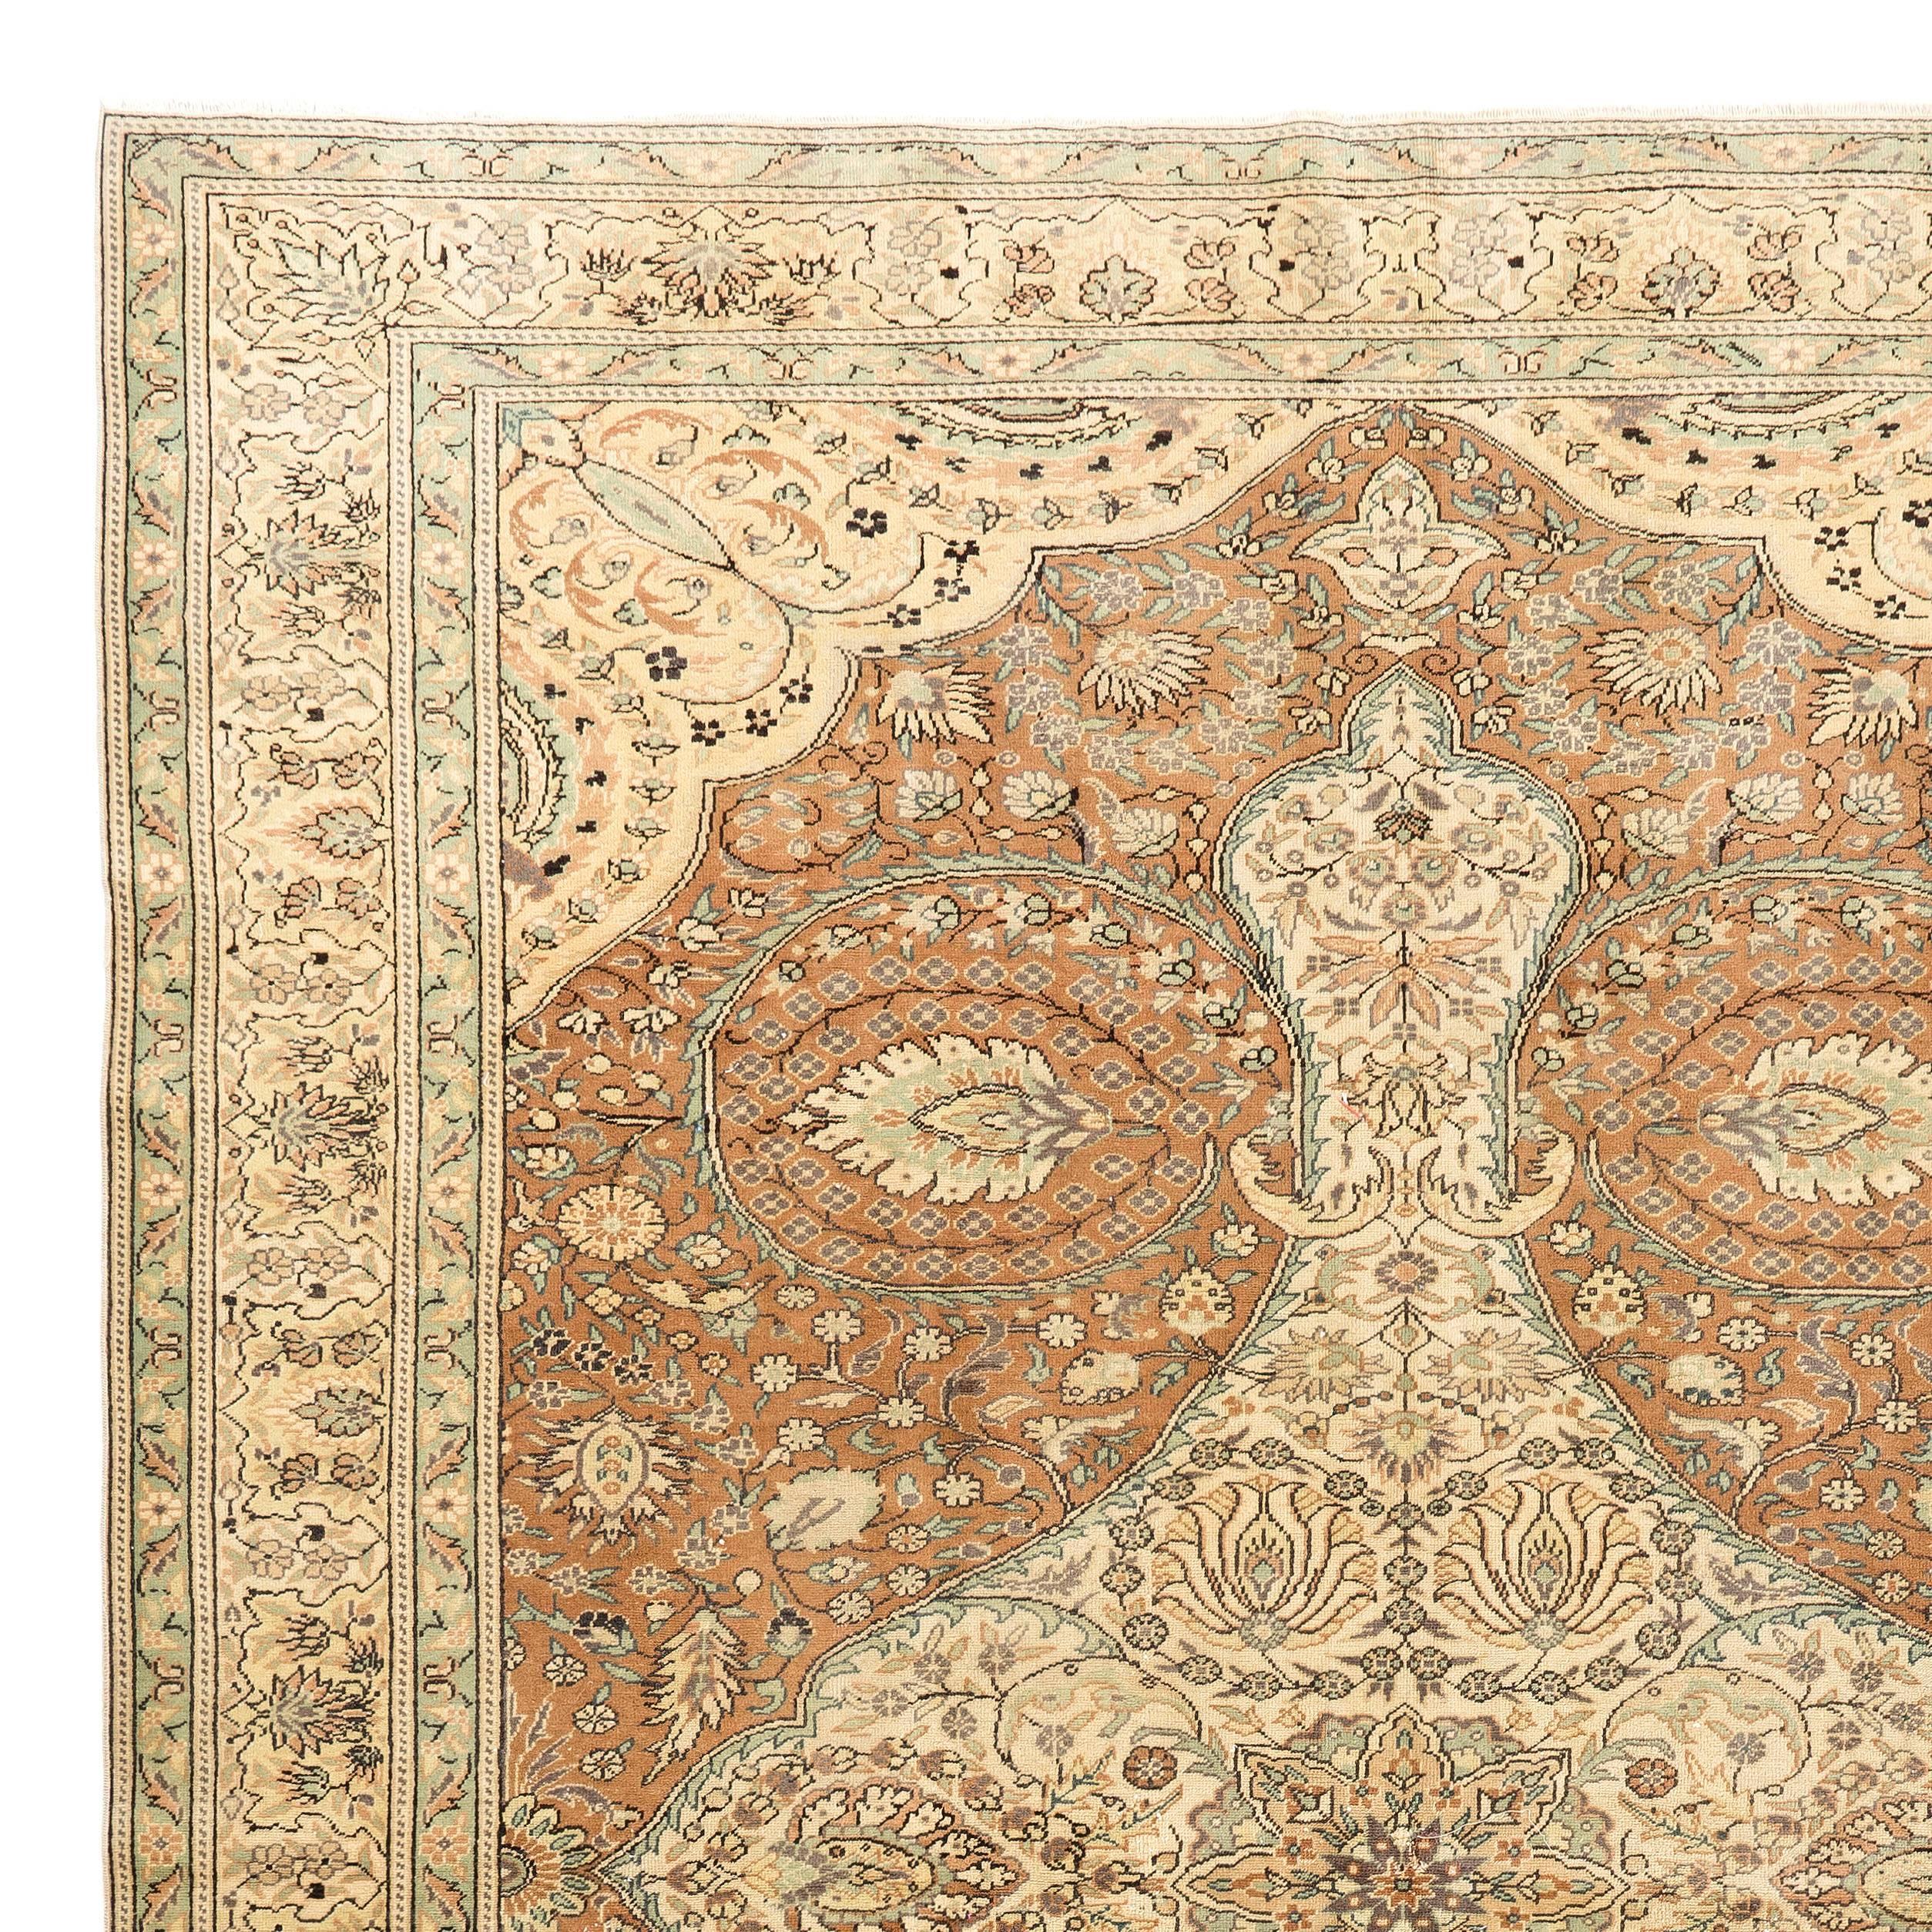 A finely hand-knotted rug from Kayseri region in Central Anatolia that has been a famous rug making centre, until late 1970s. This beautiful example is well drawn and in very good condition. Unusual earthy color palette with soft terra-cotta, brown,